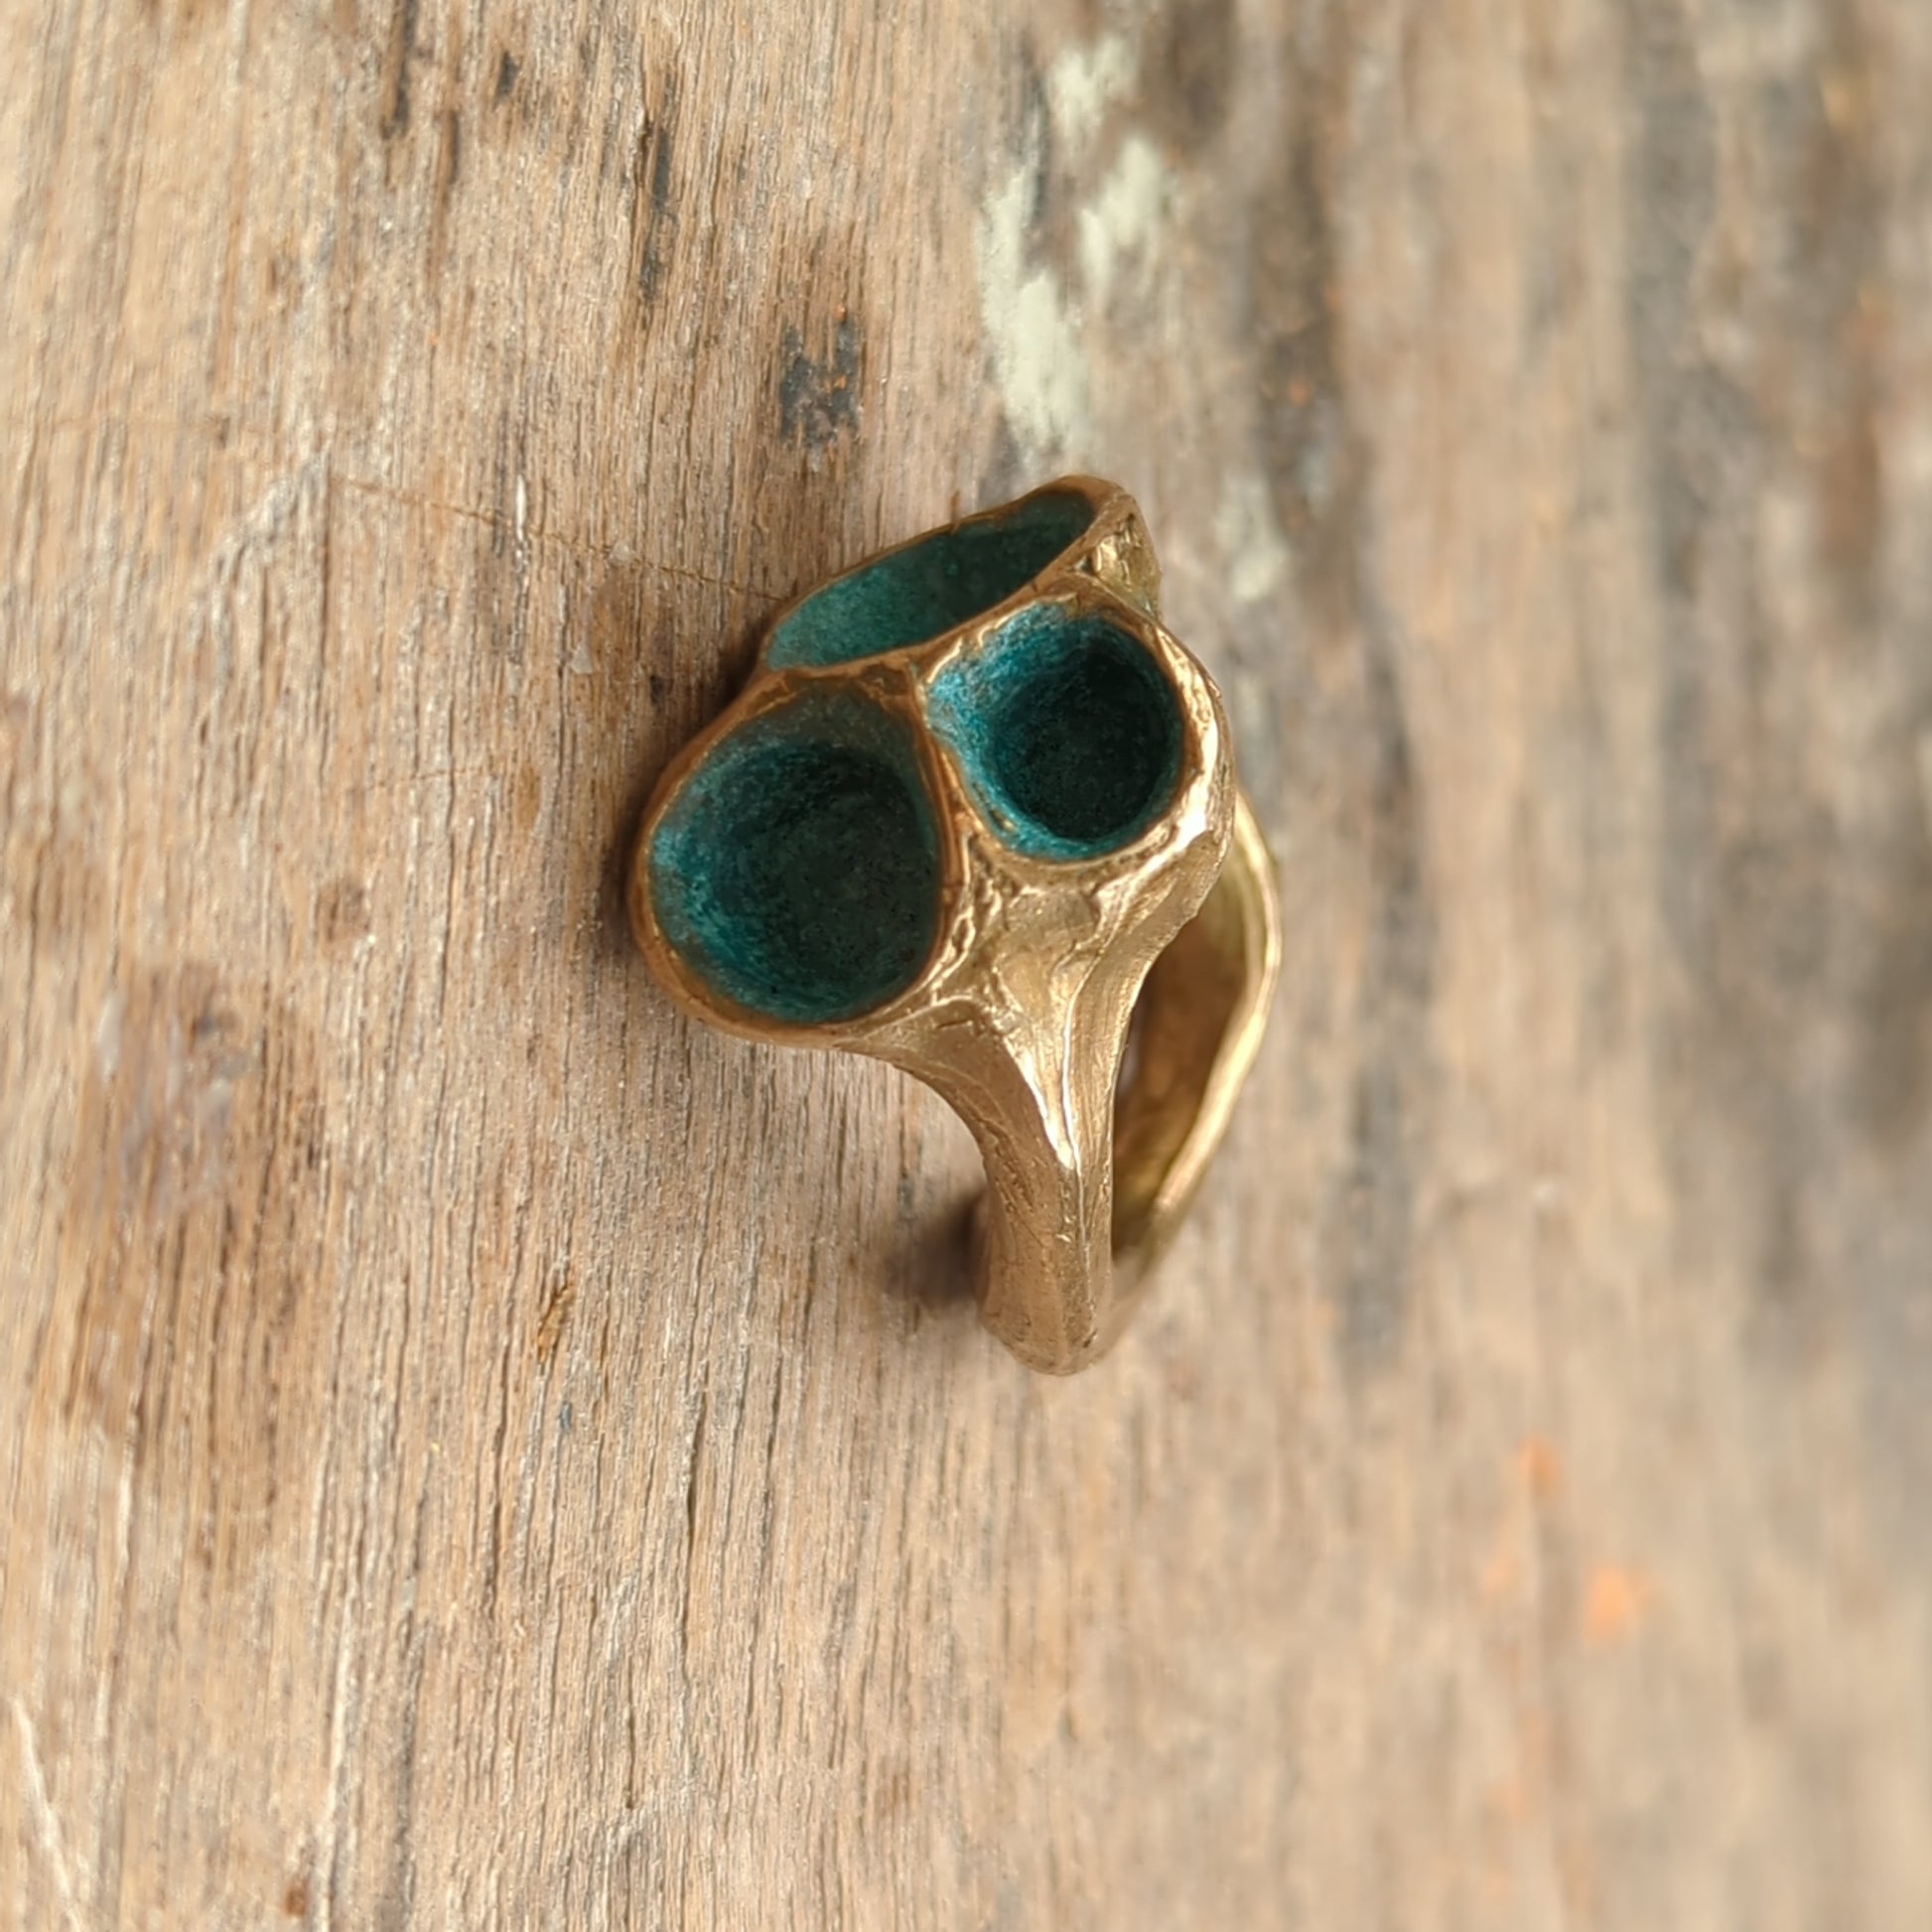 'Artefact' Statement ring Bronze with Turquoise patina. 7.-Beca Beeby